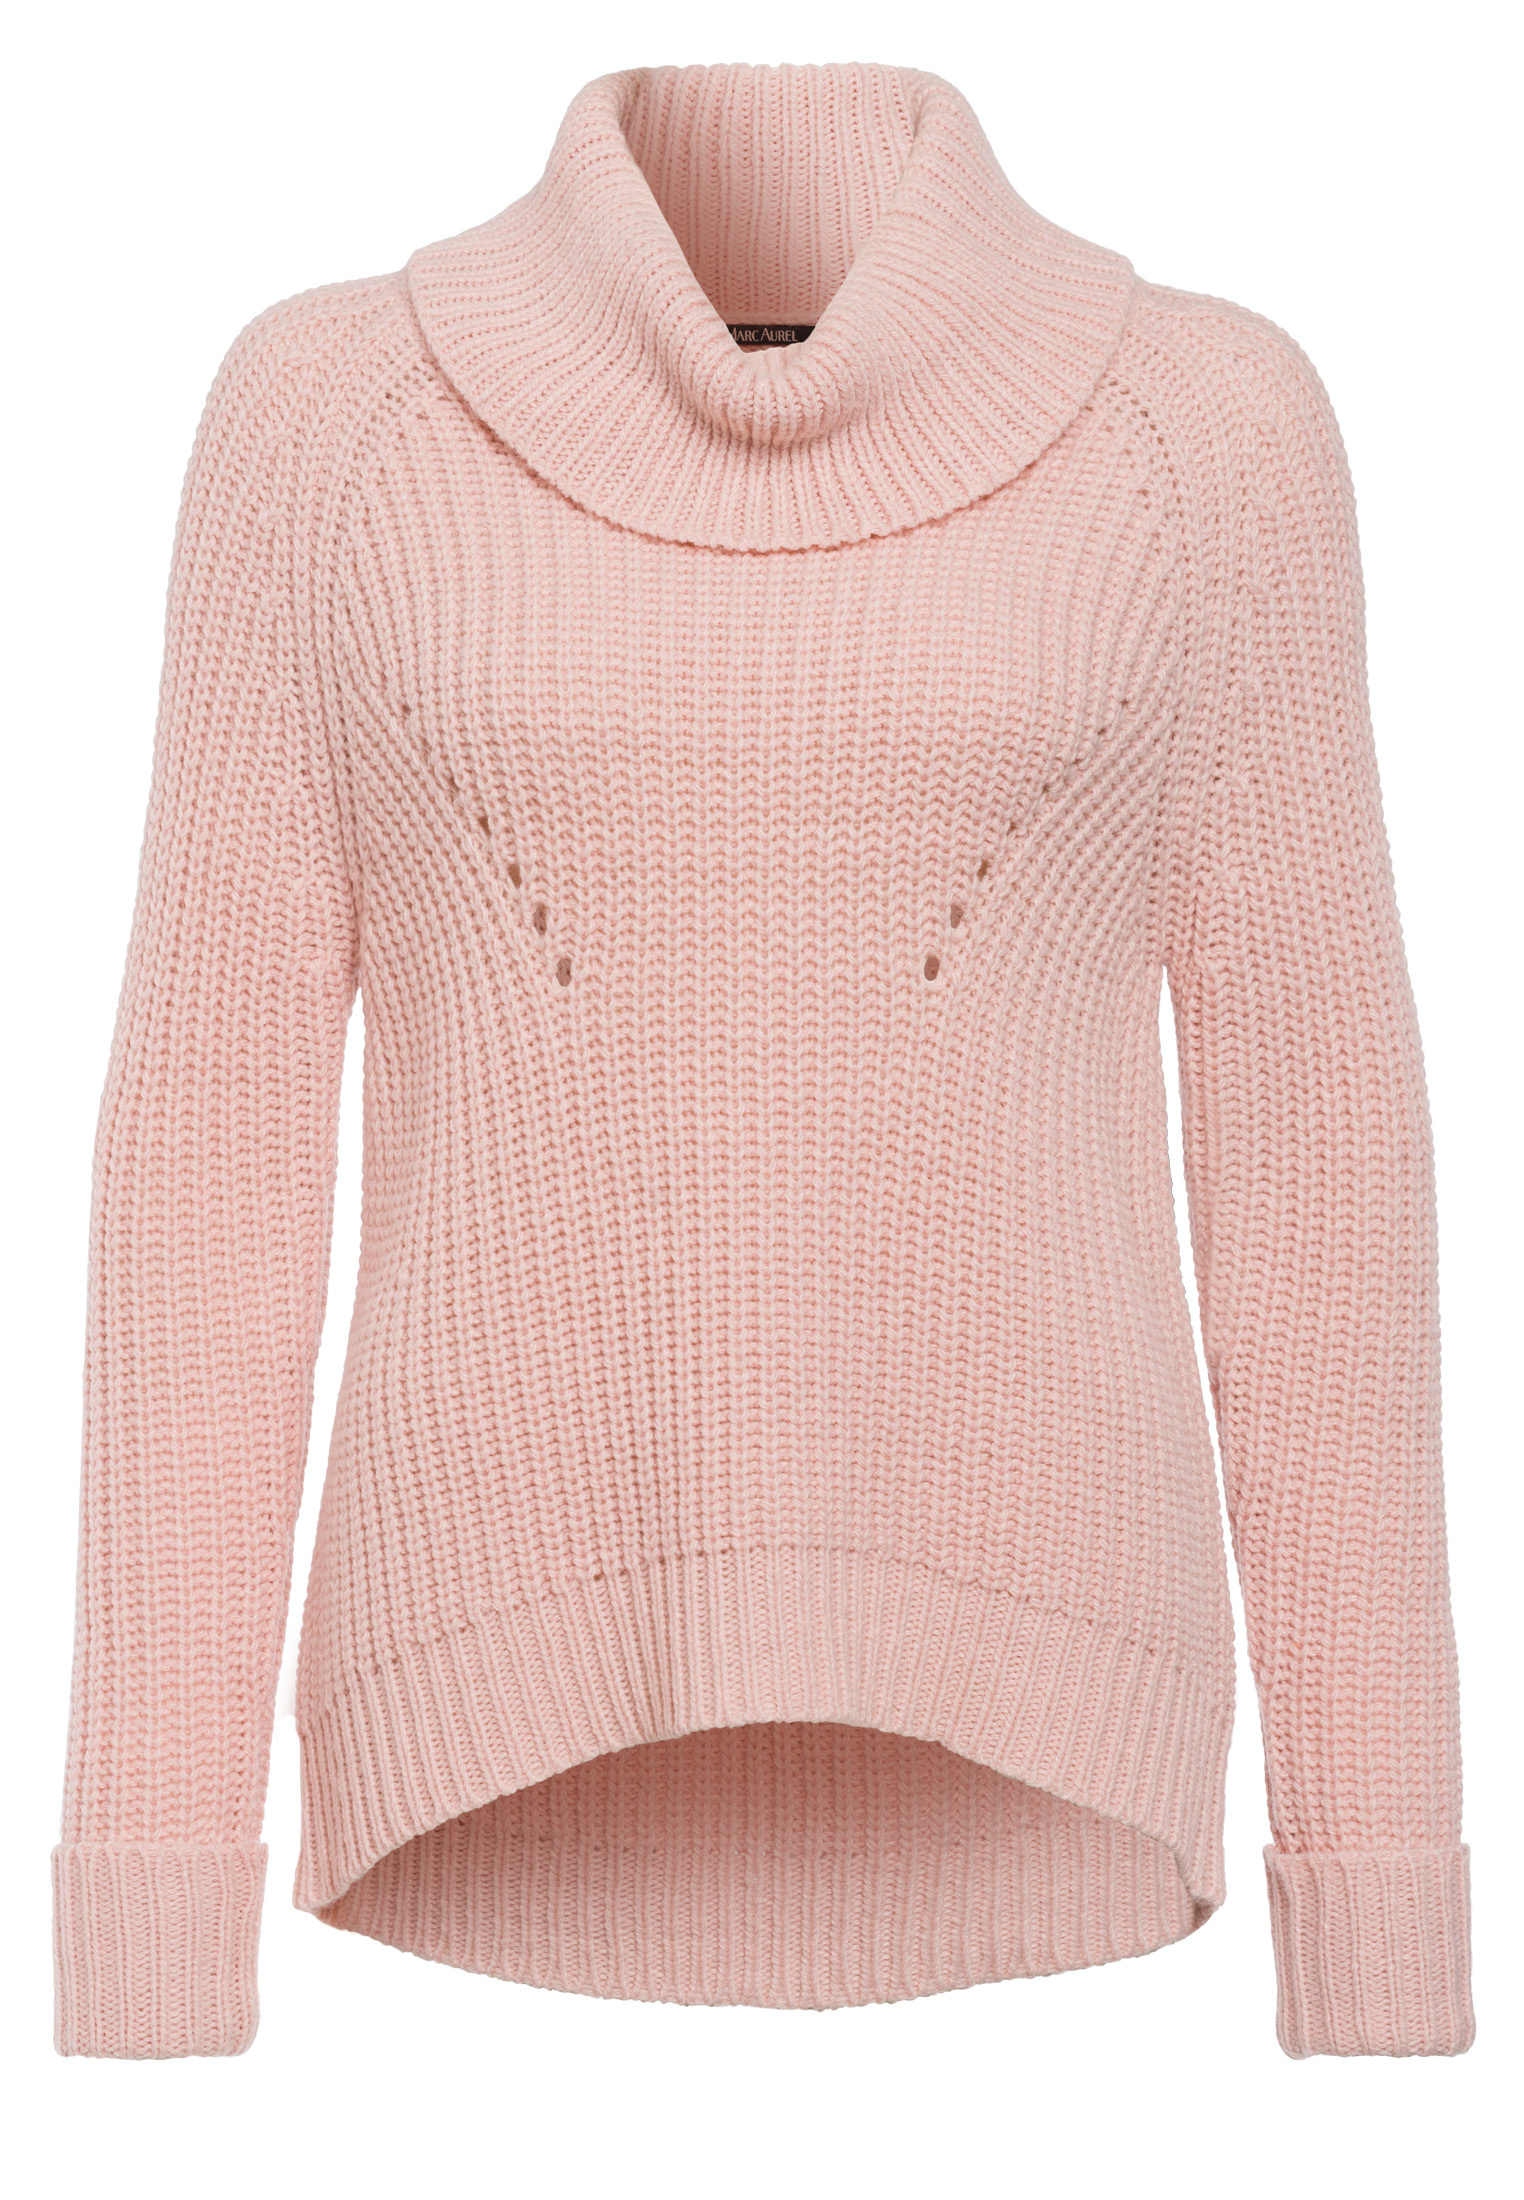 Jumper with large rolled collar | Knitwear | Fashion